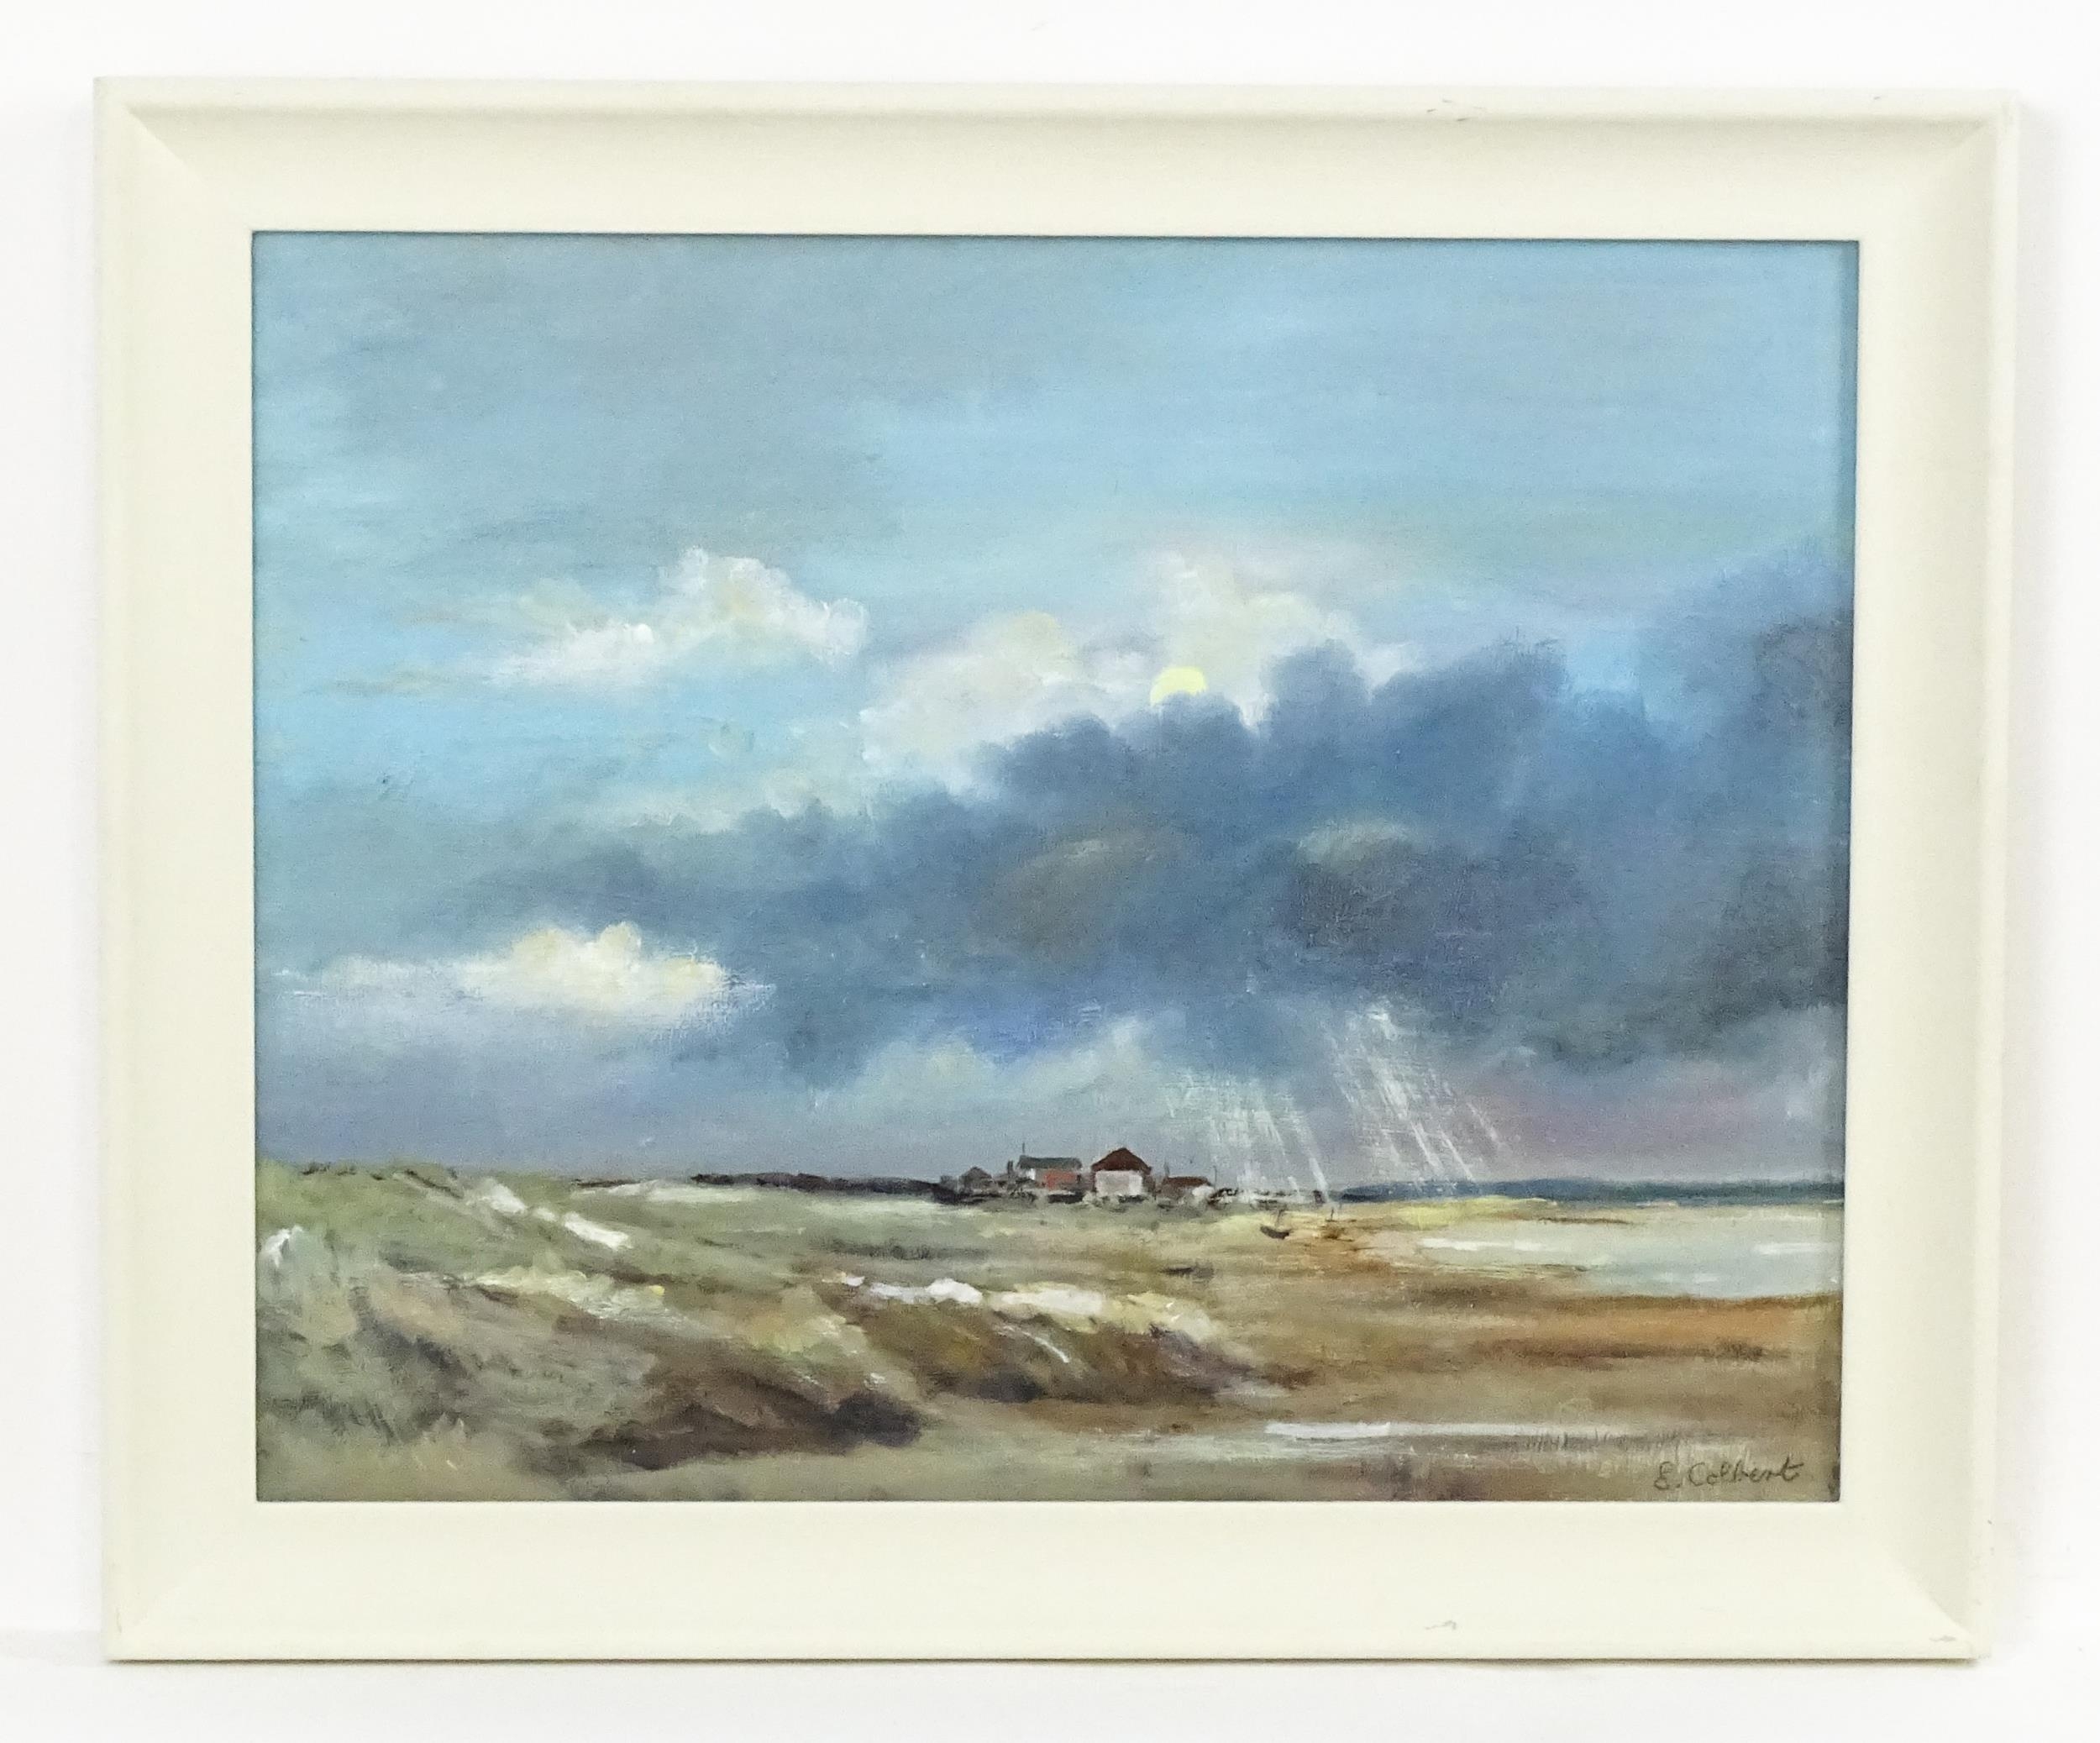 Elaine Colbert, 20th century, Oil on canvas, Suffolk landscape. Signed lower right and ascribed